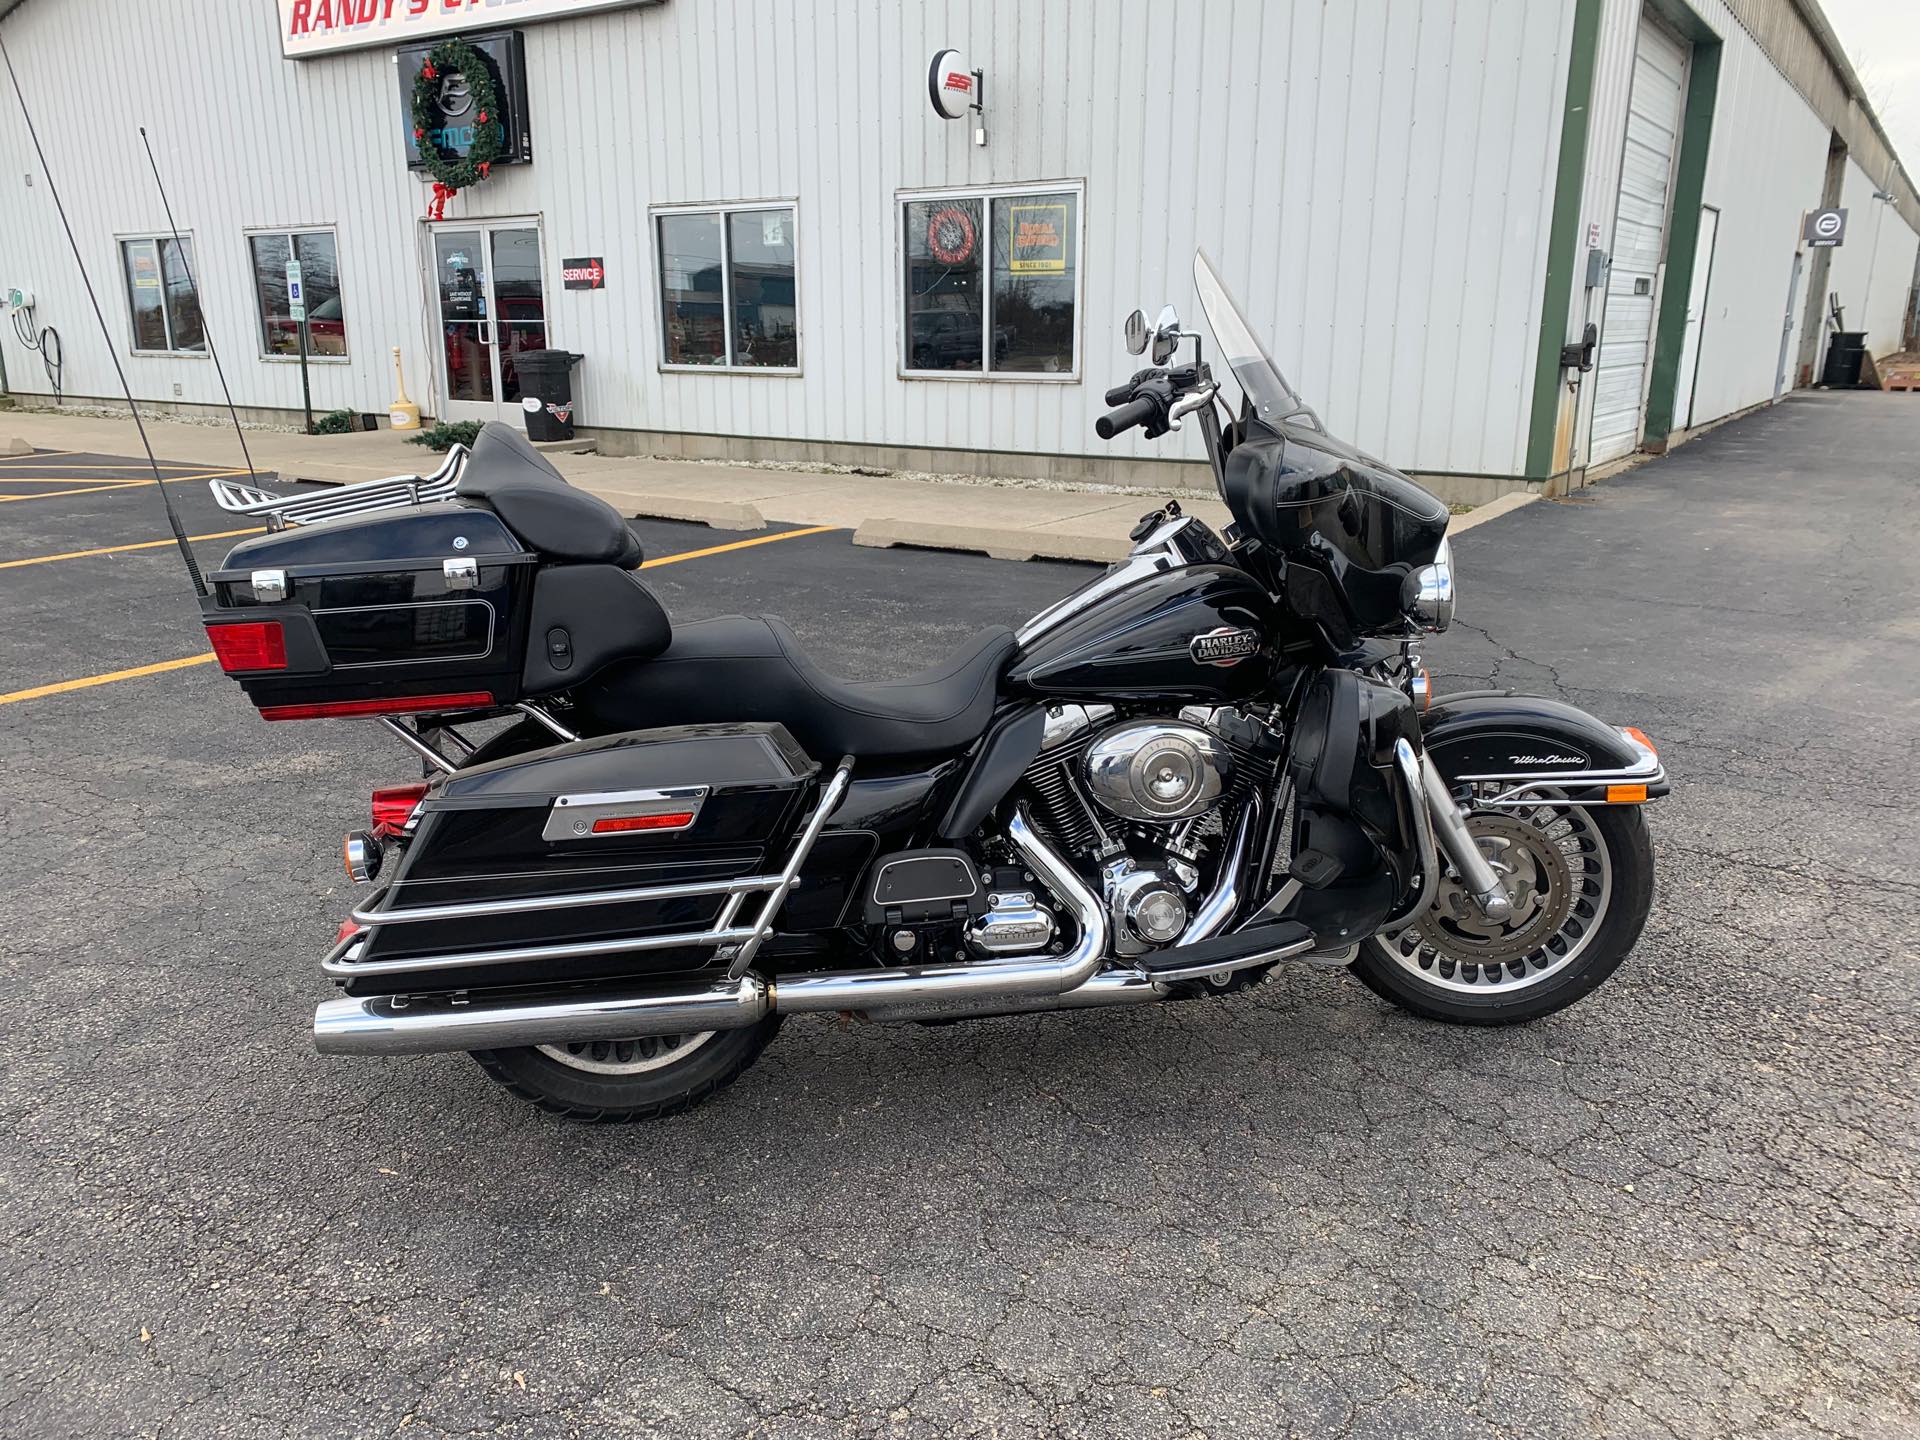 2010 Harley-Davidson Ultra Classic Electra Glide at Randy's Cycle